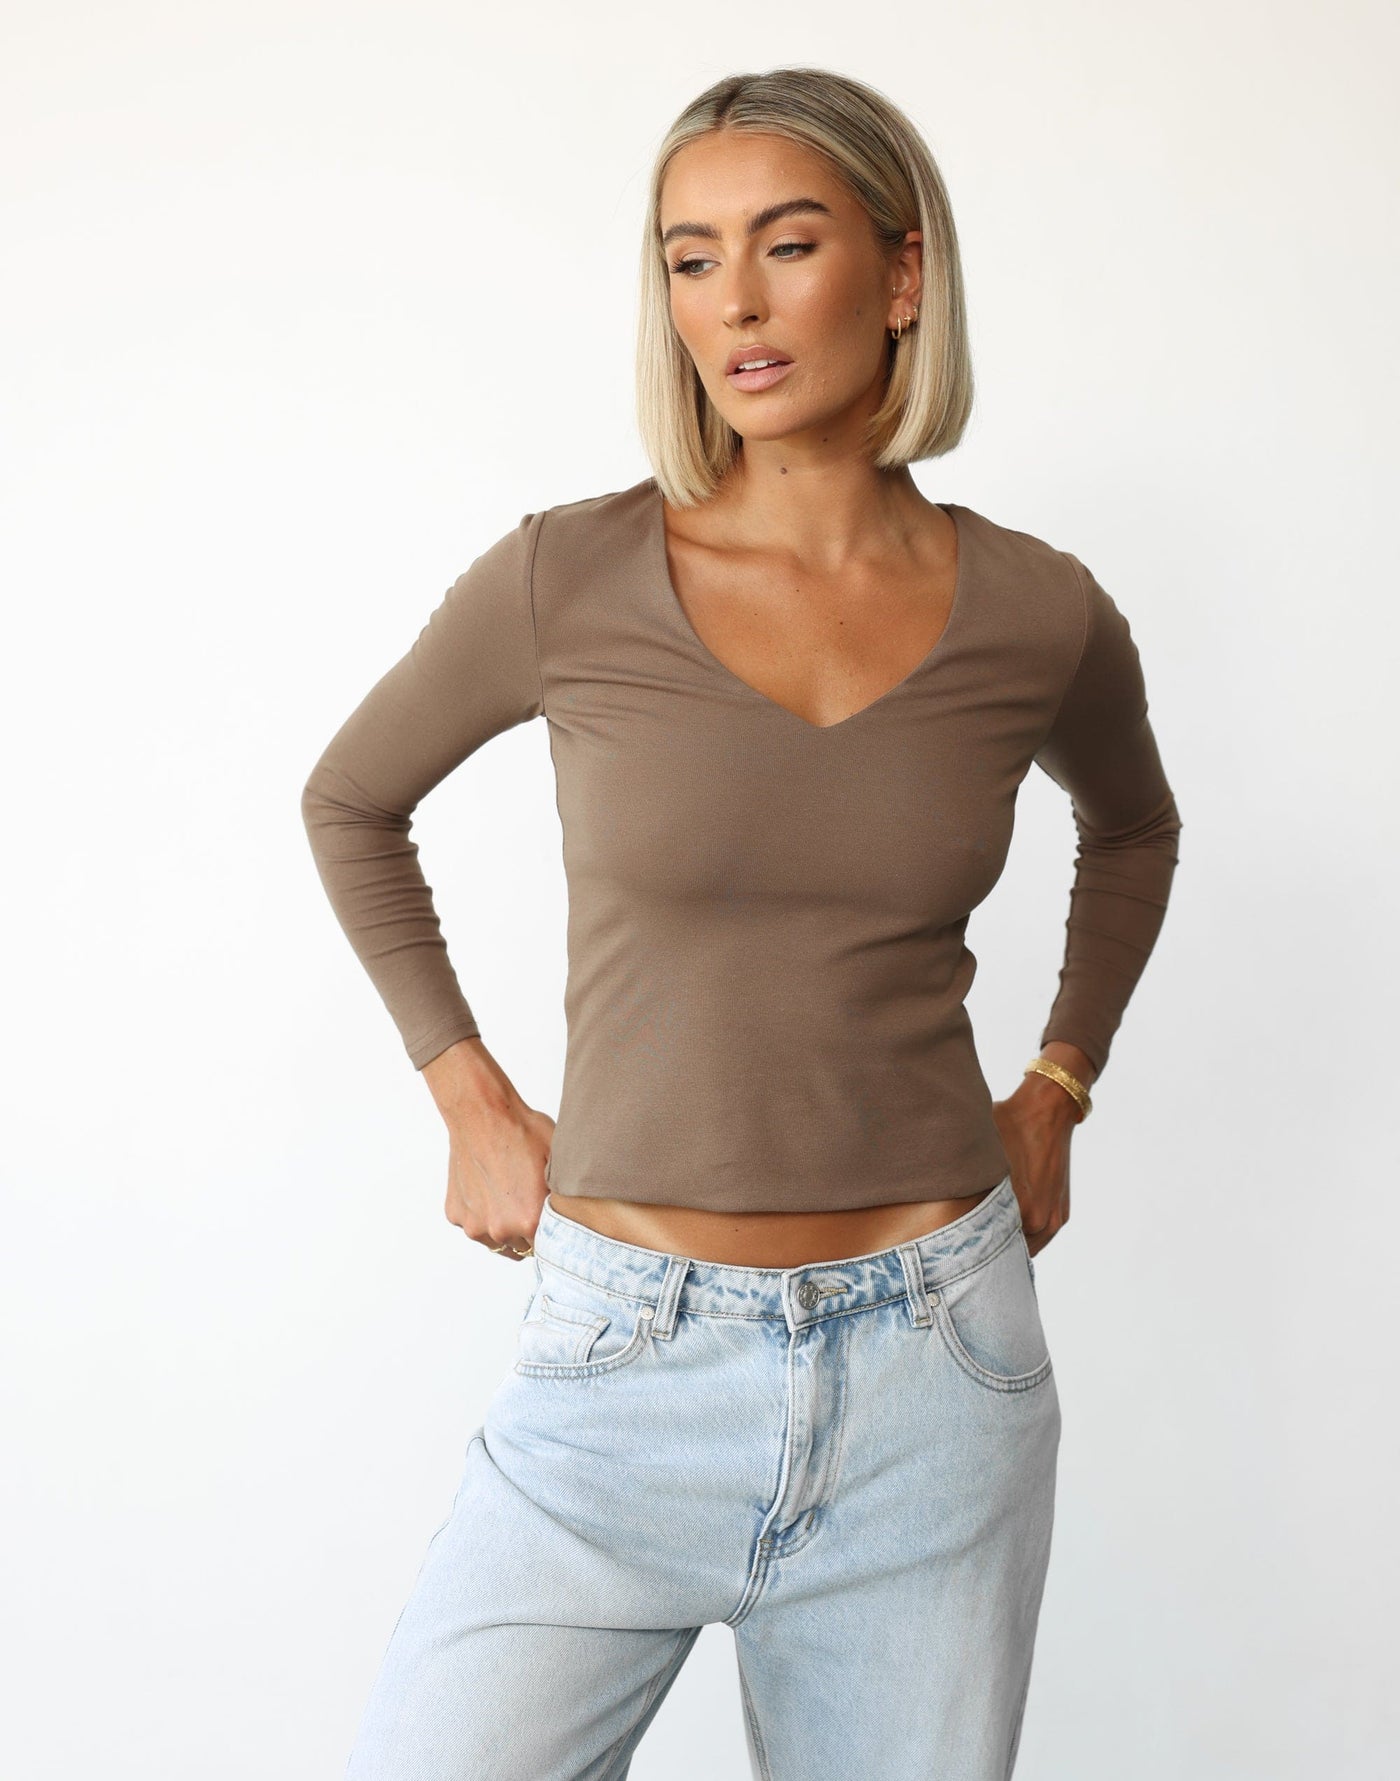 Diona Long Sleeve Top (Brown) - Brown Long Sleeve Top - Women's Top - Charcoal Clothing